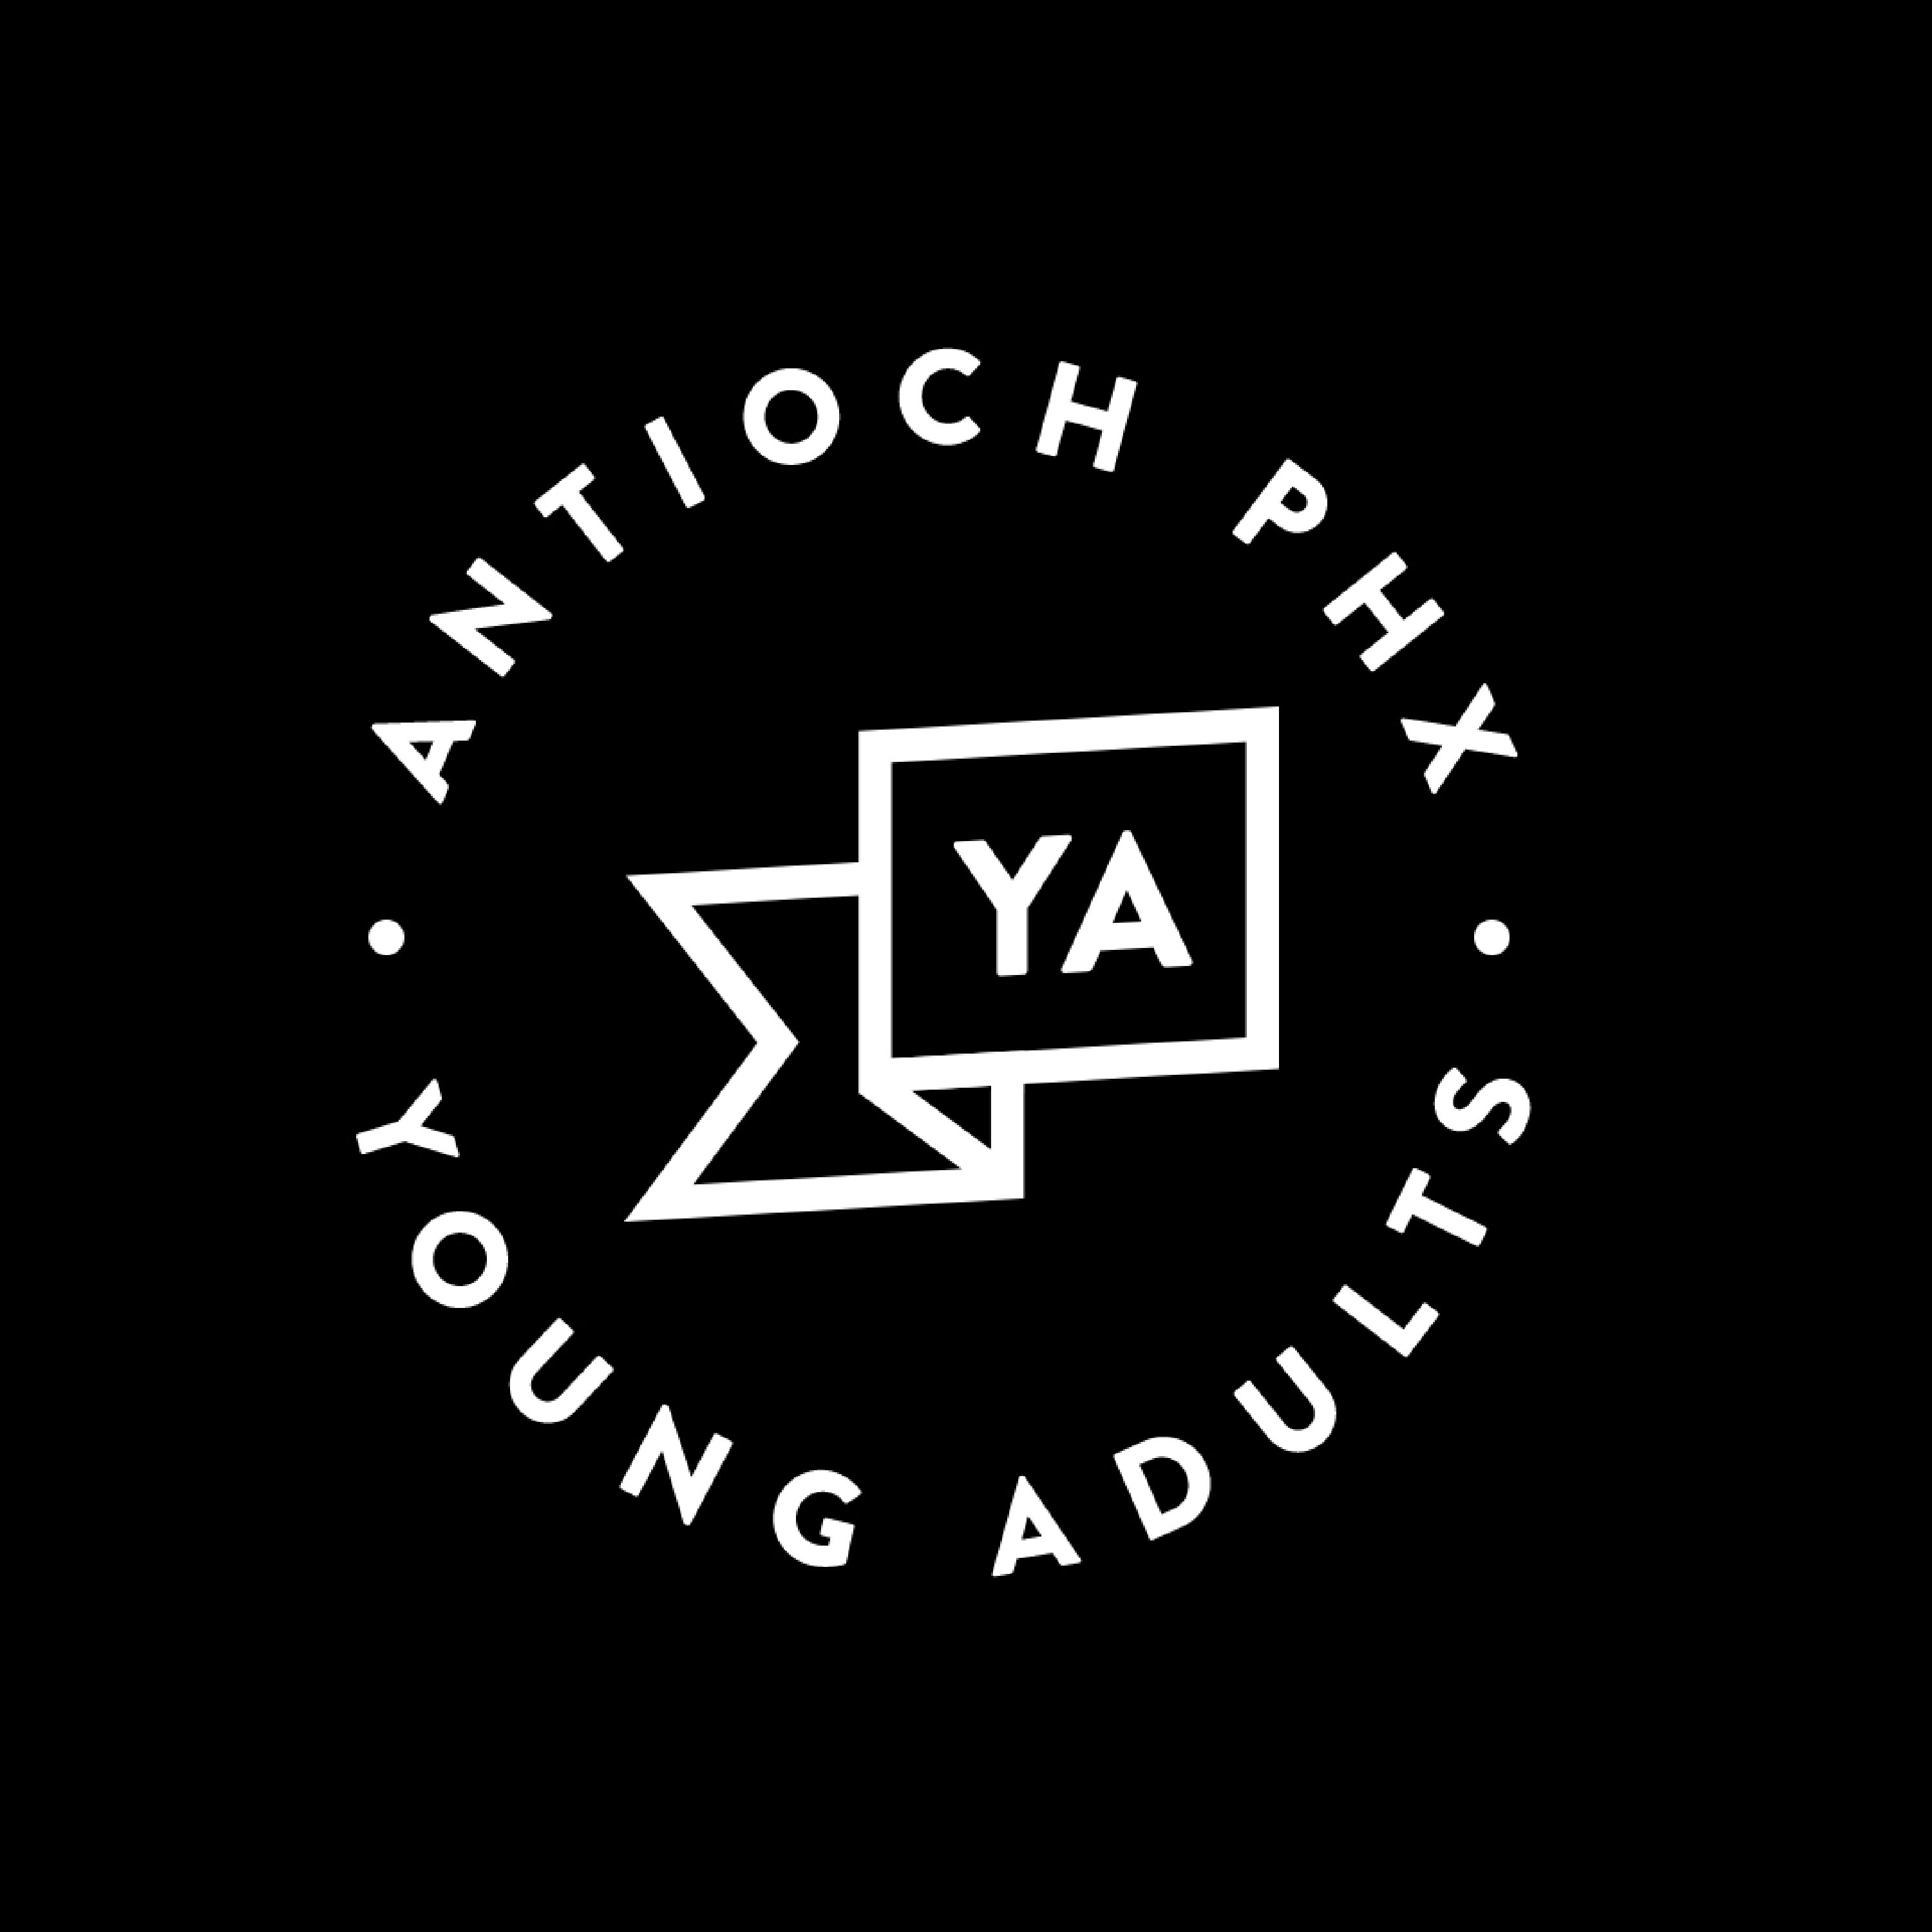 Antioch Young Adults